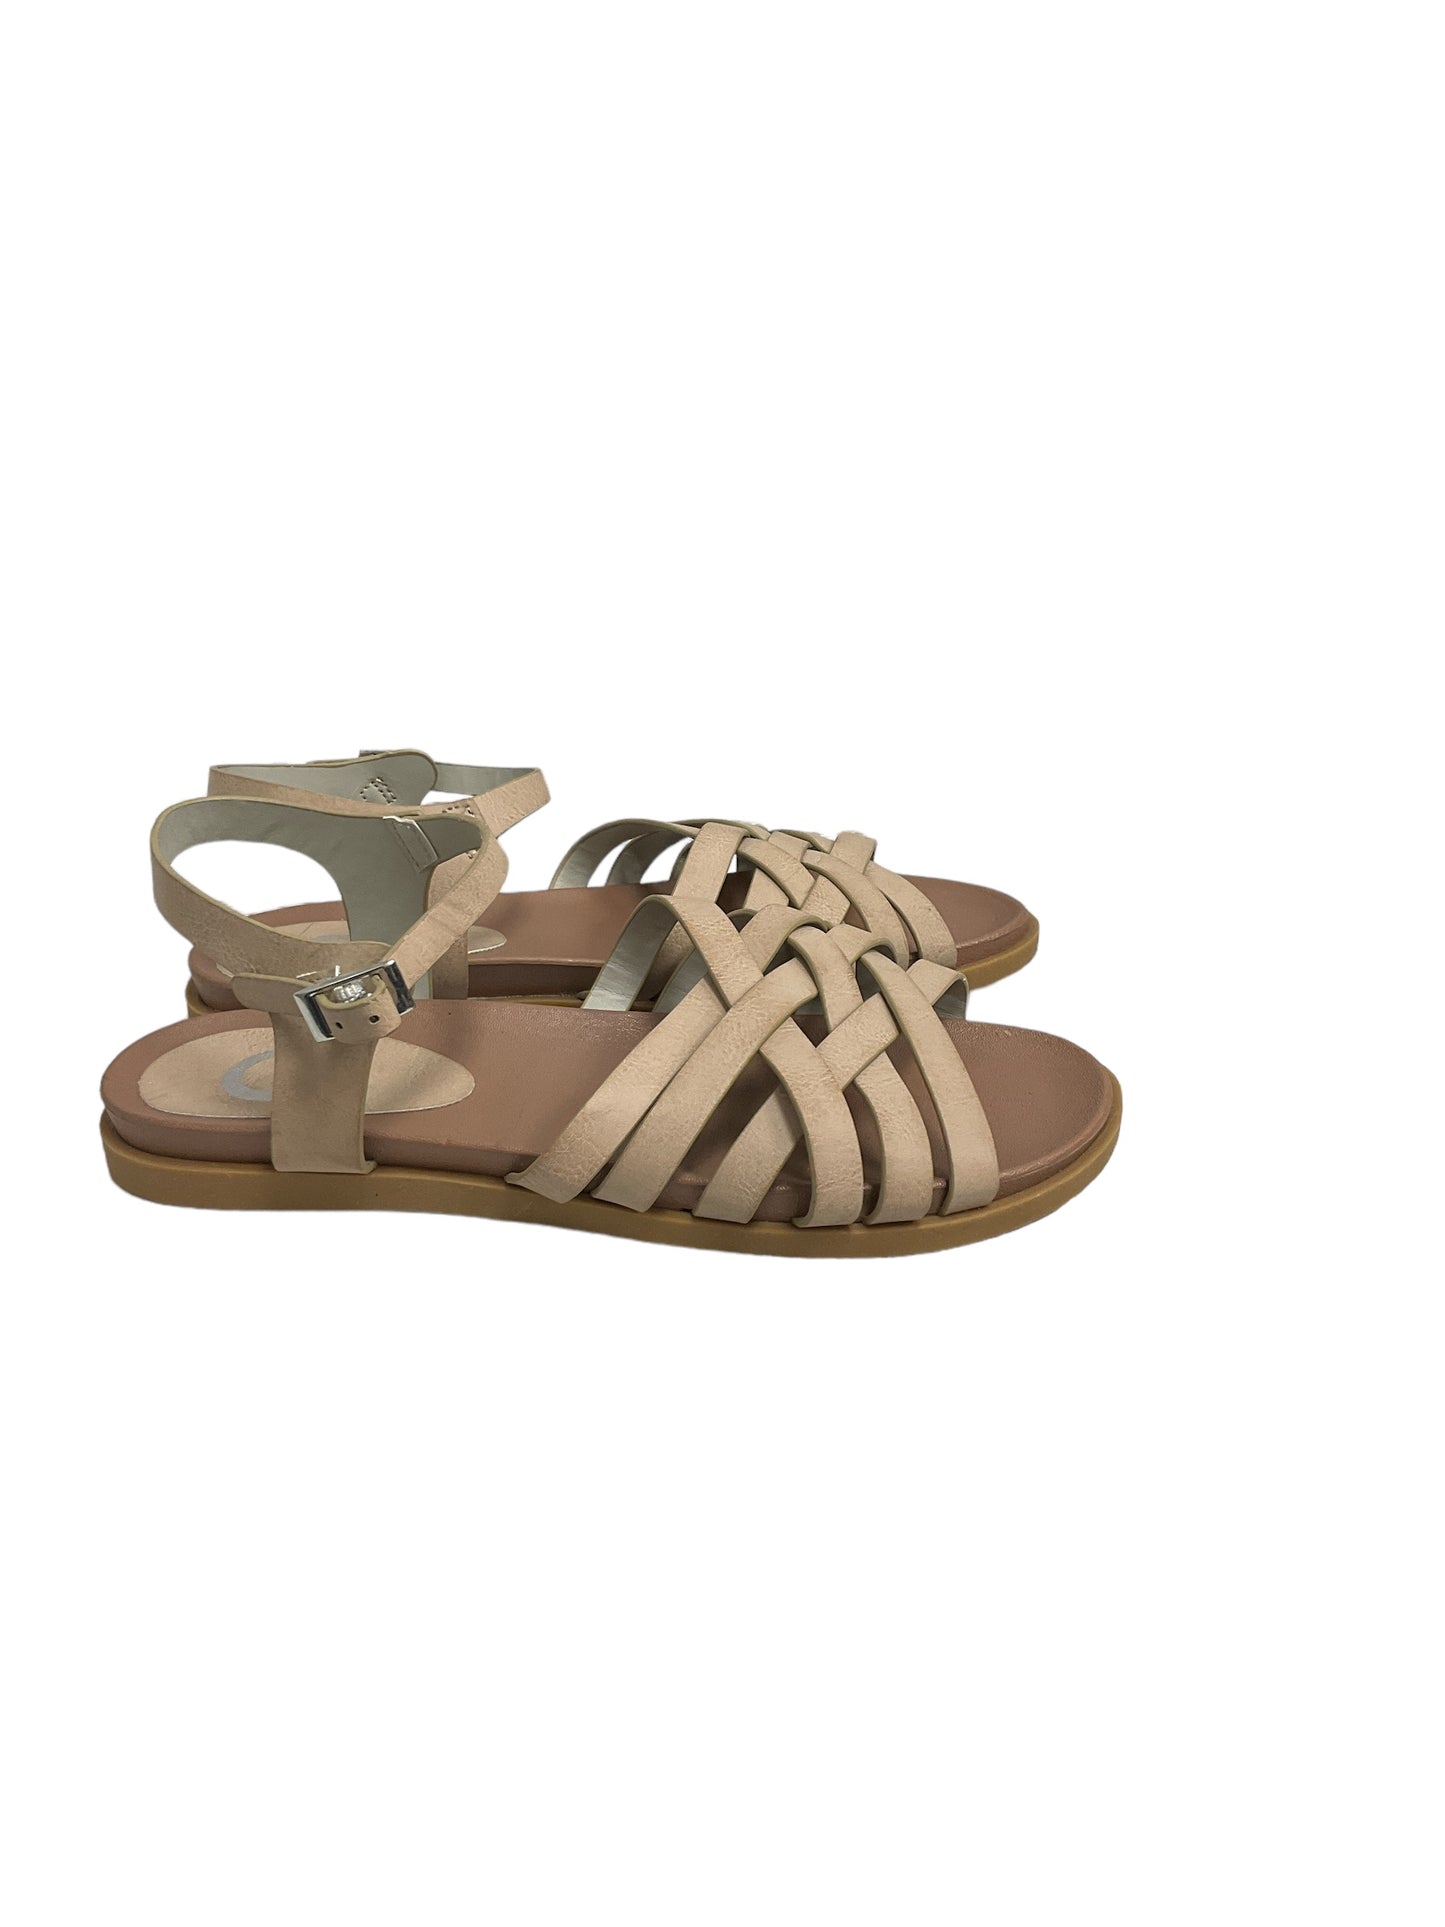 Sandals Flats By Journee  Size: 6.5